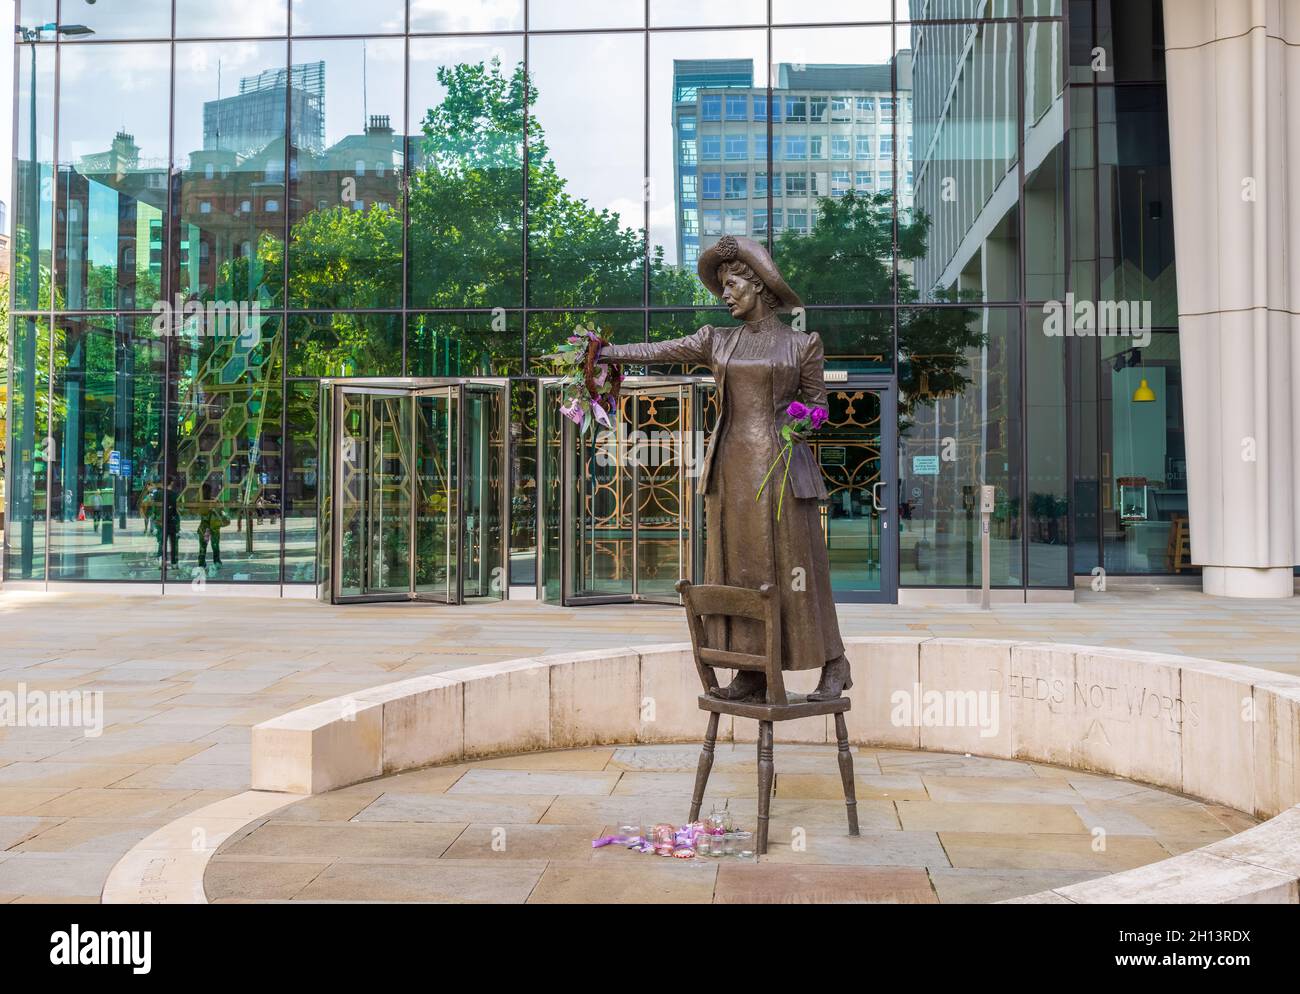 The bronze statue of Emmeline Pankhurst in Manchester, British political activist and leader of the suffragette movement in the U.K. Stock Photo